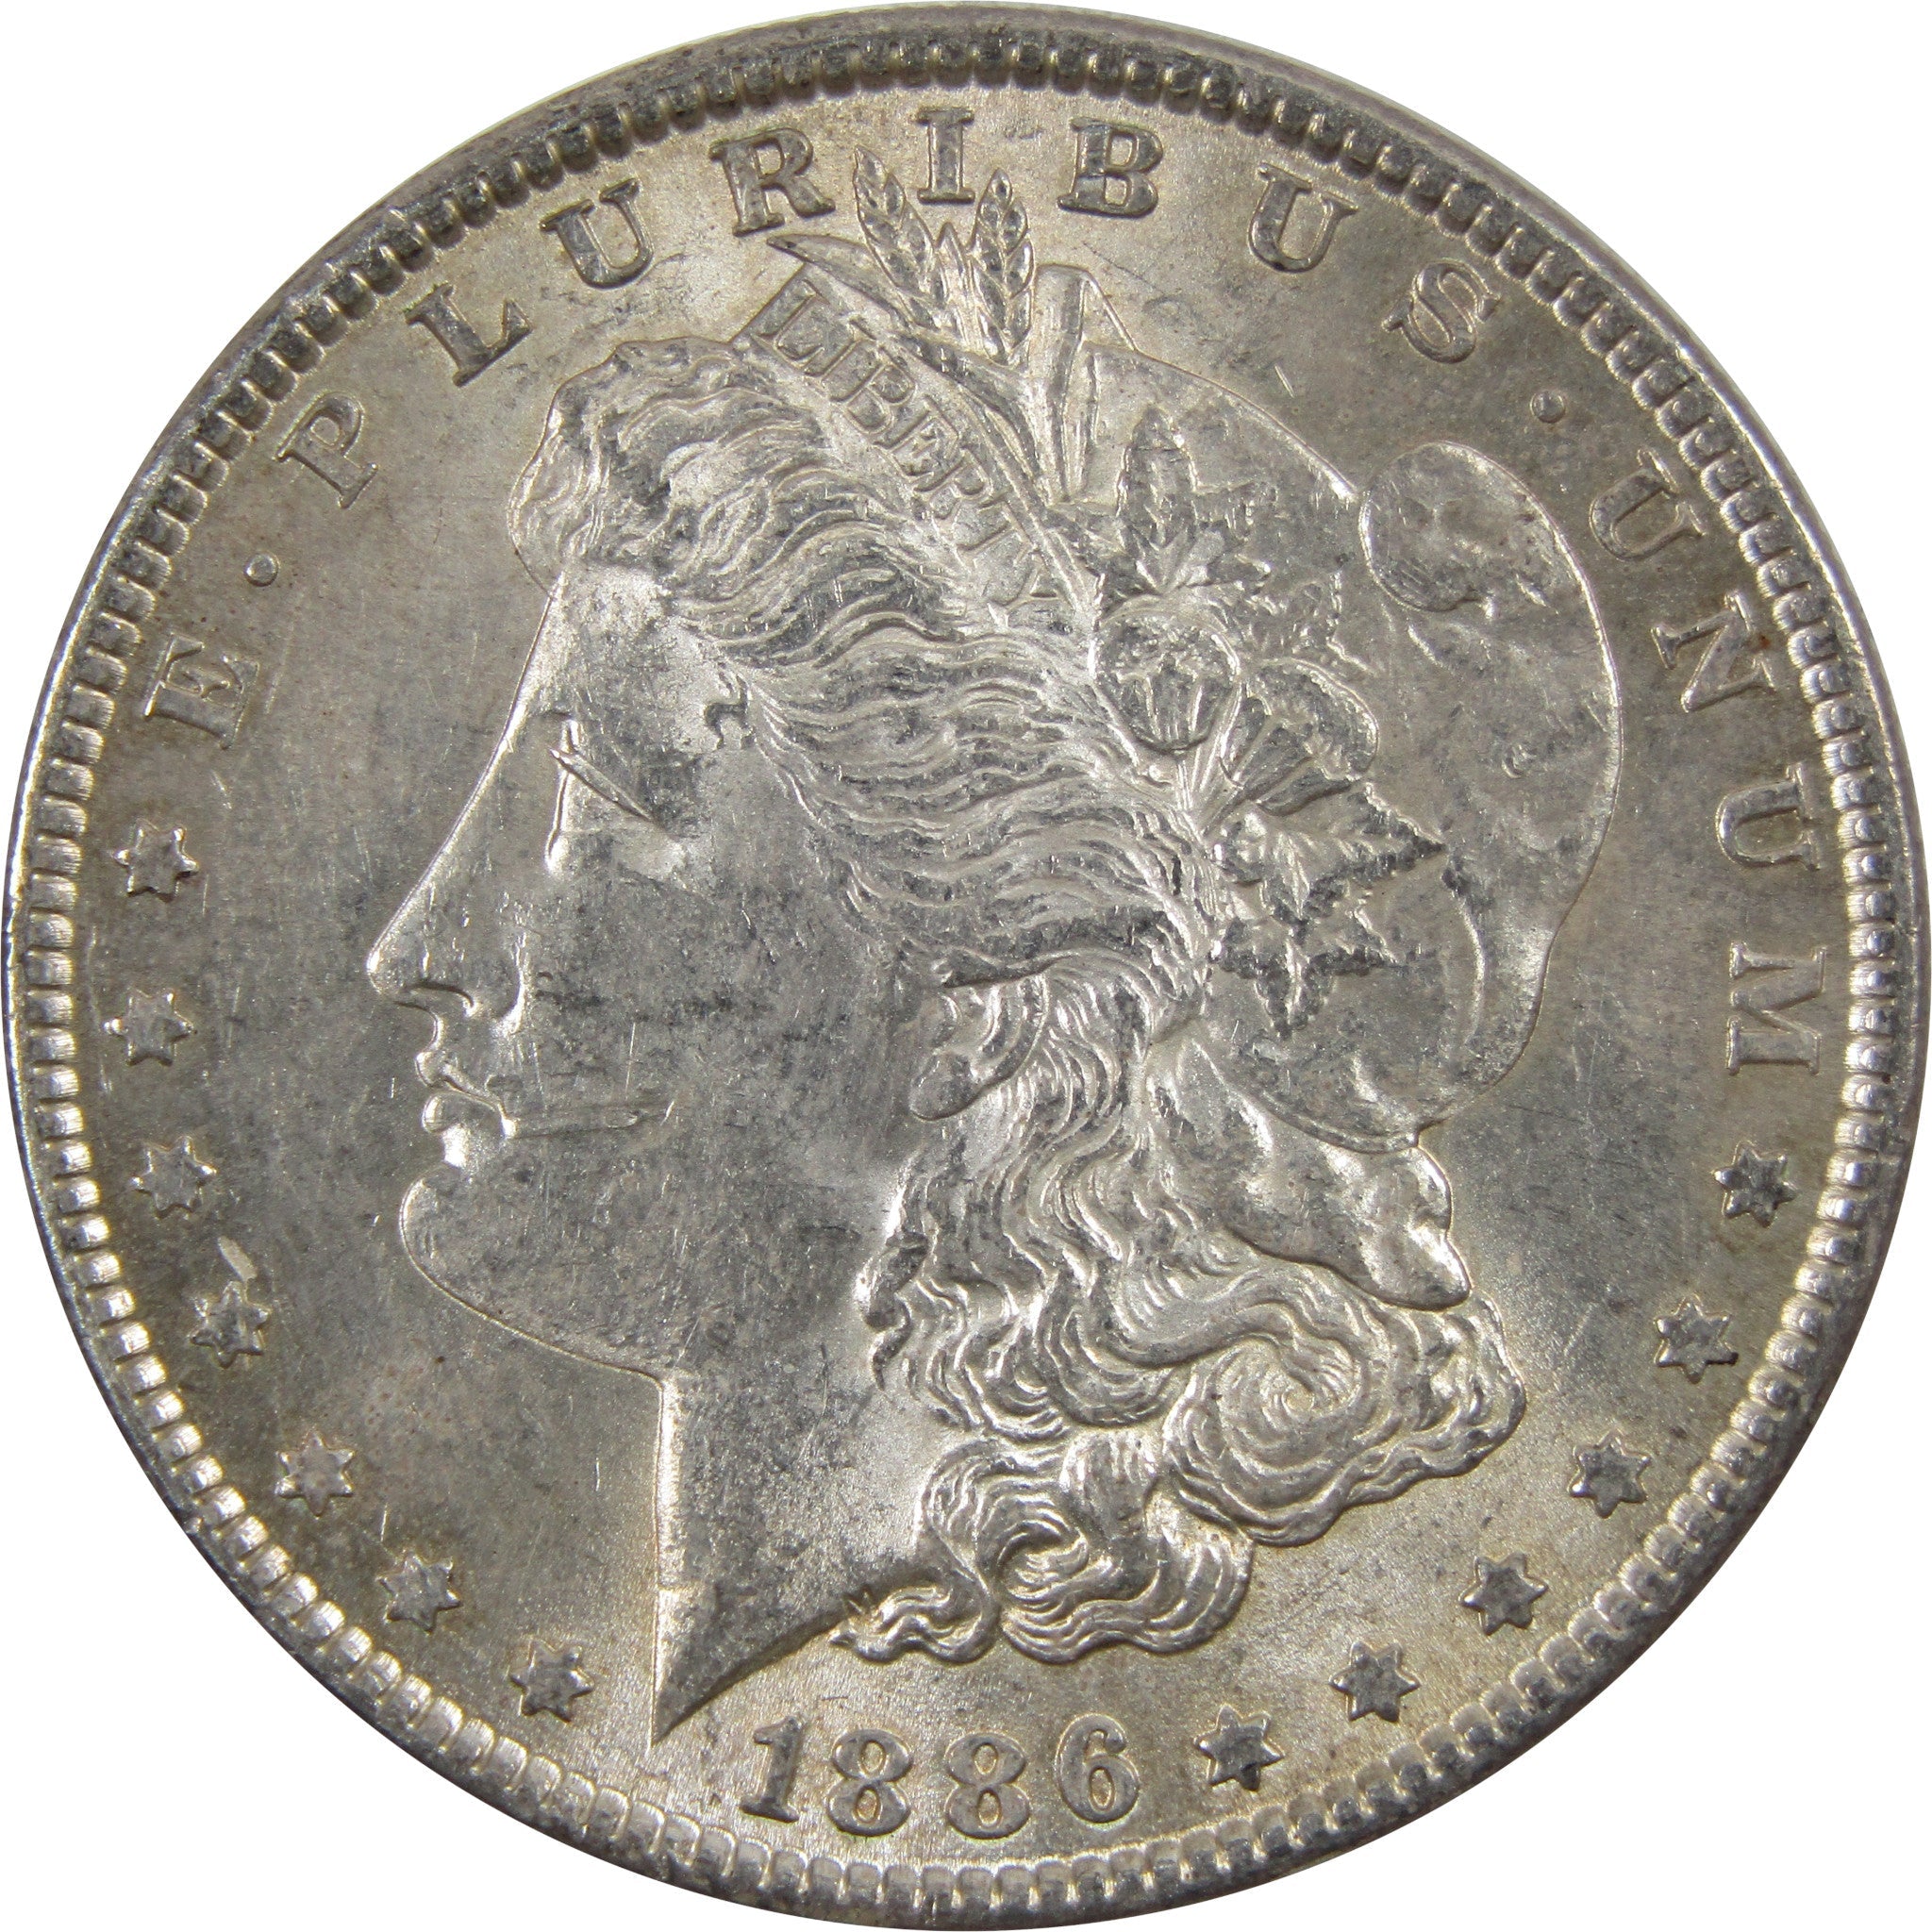 1886 Morgan Dollar AU About Uncirculated 90% Silver $1 Coin SKU:I5493 - Morgan coin - Morgan silver dollar - Morgan silver dollar for sale - Profile Coins &amp; Collectibles